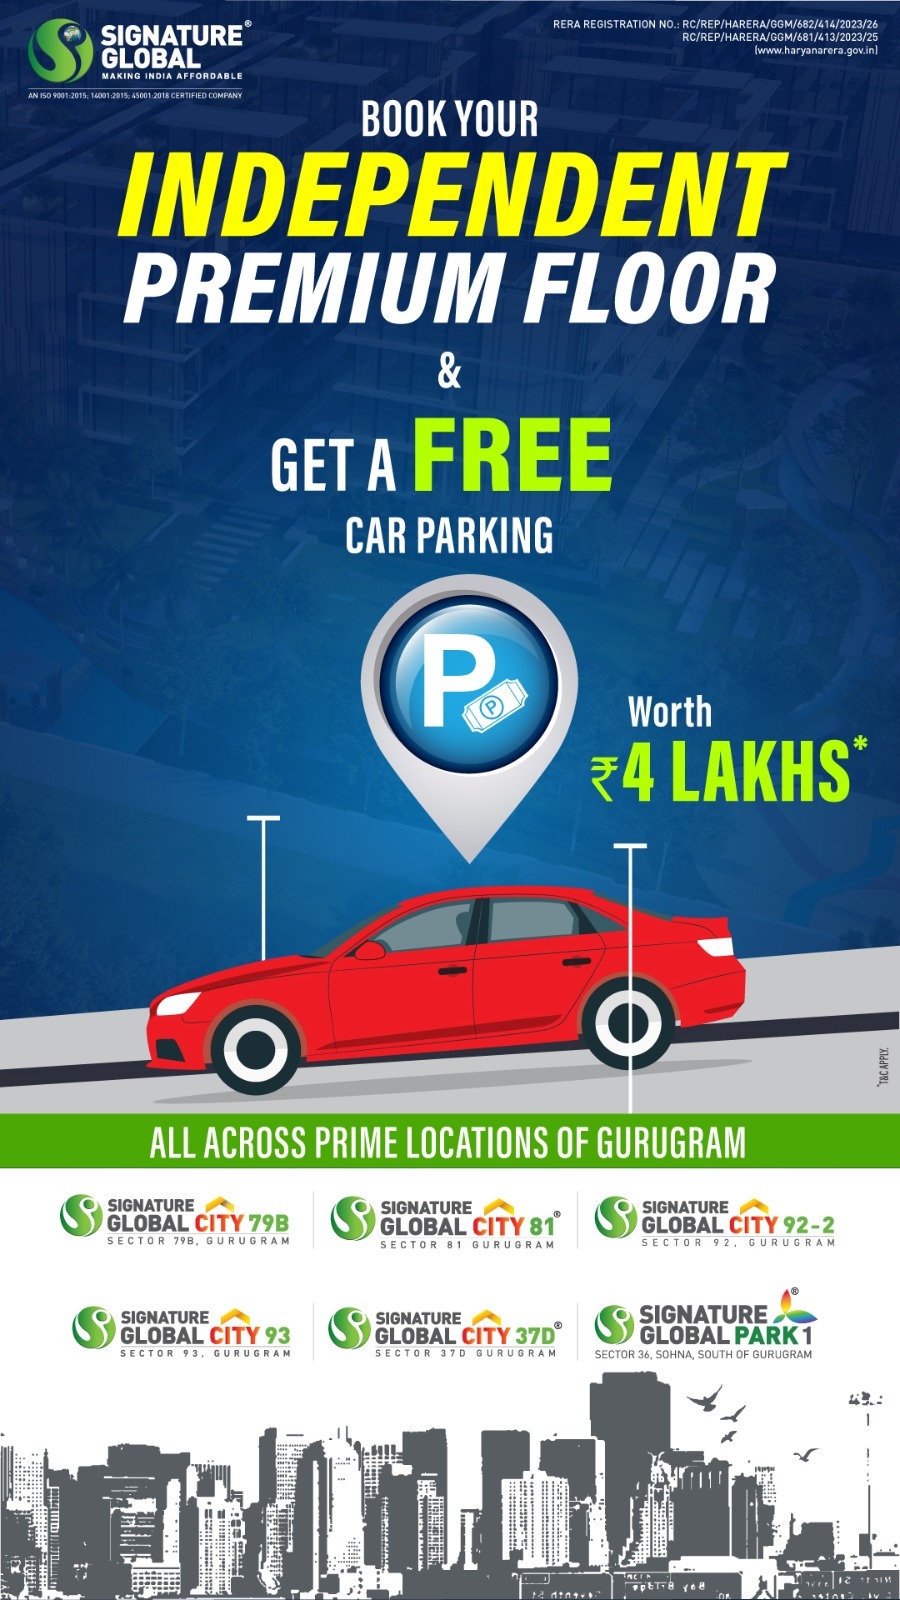 Book your independent premium floor and get a free car parking at Signature Global in Gurgaon